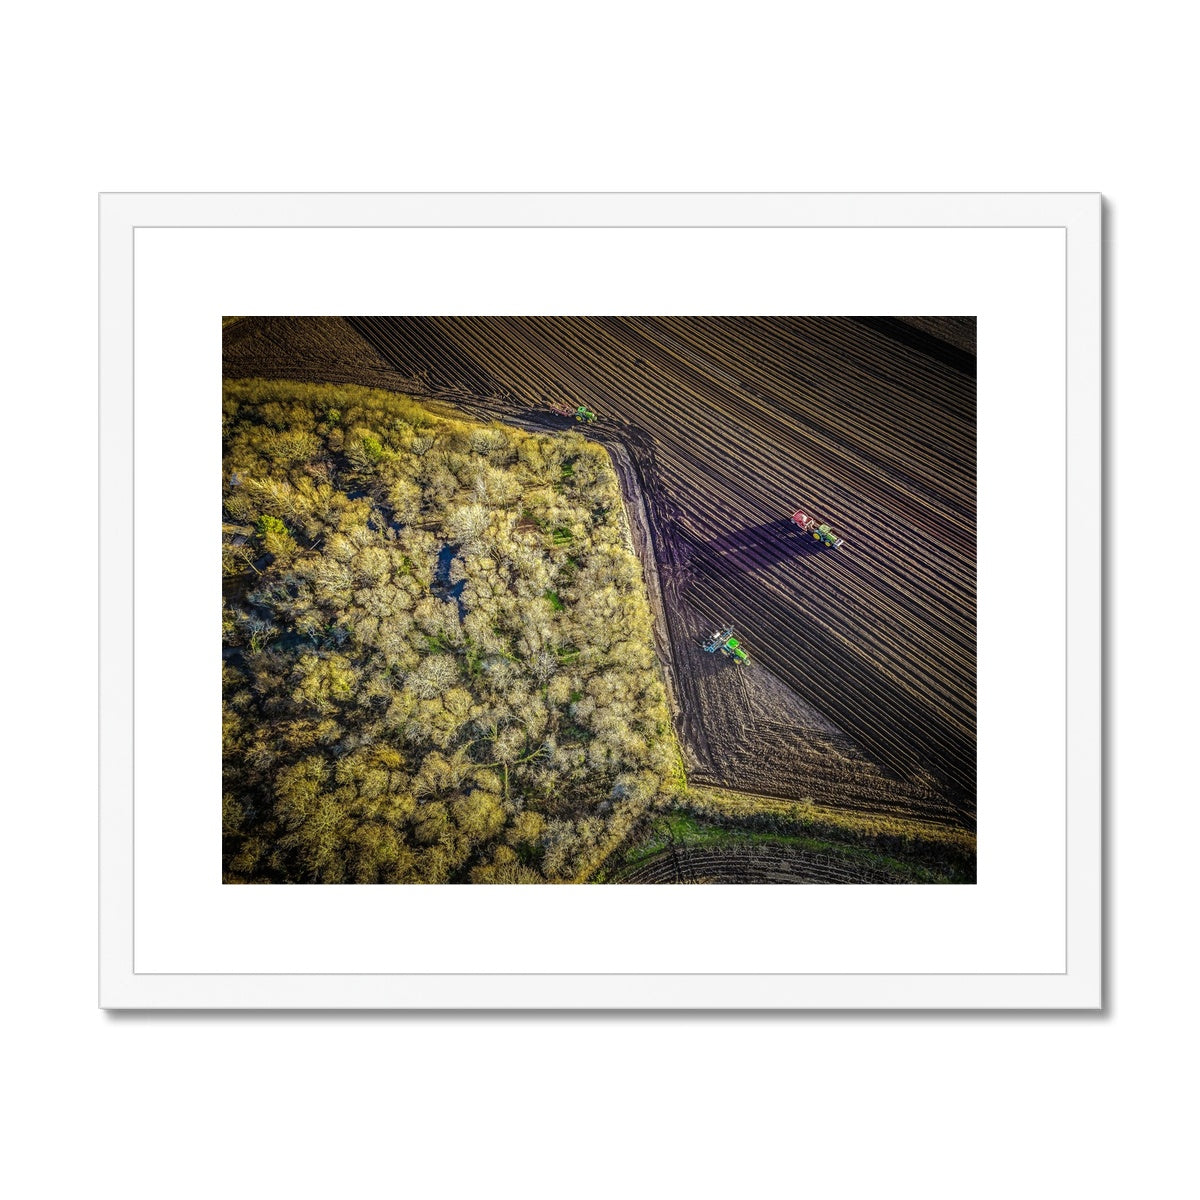 ploughing the fields white frame